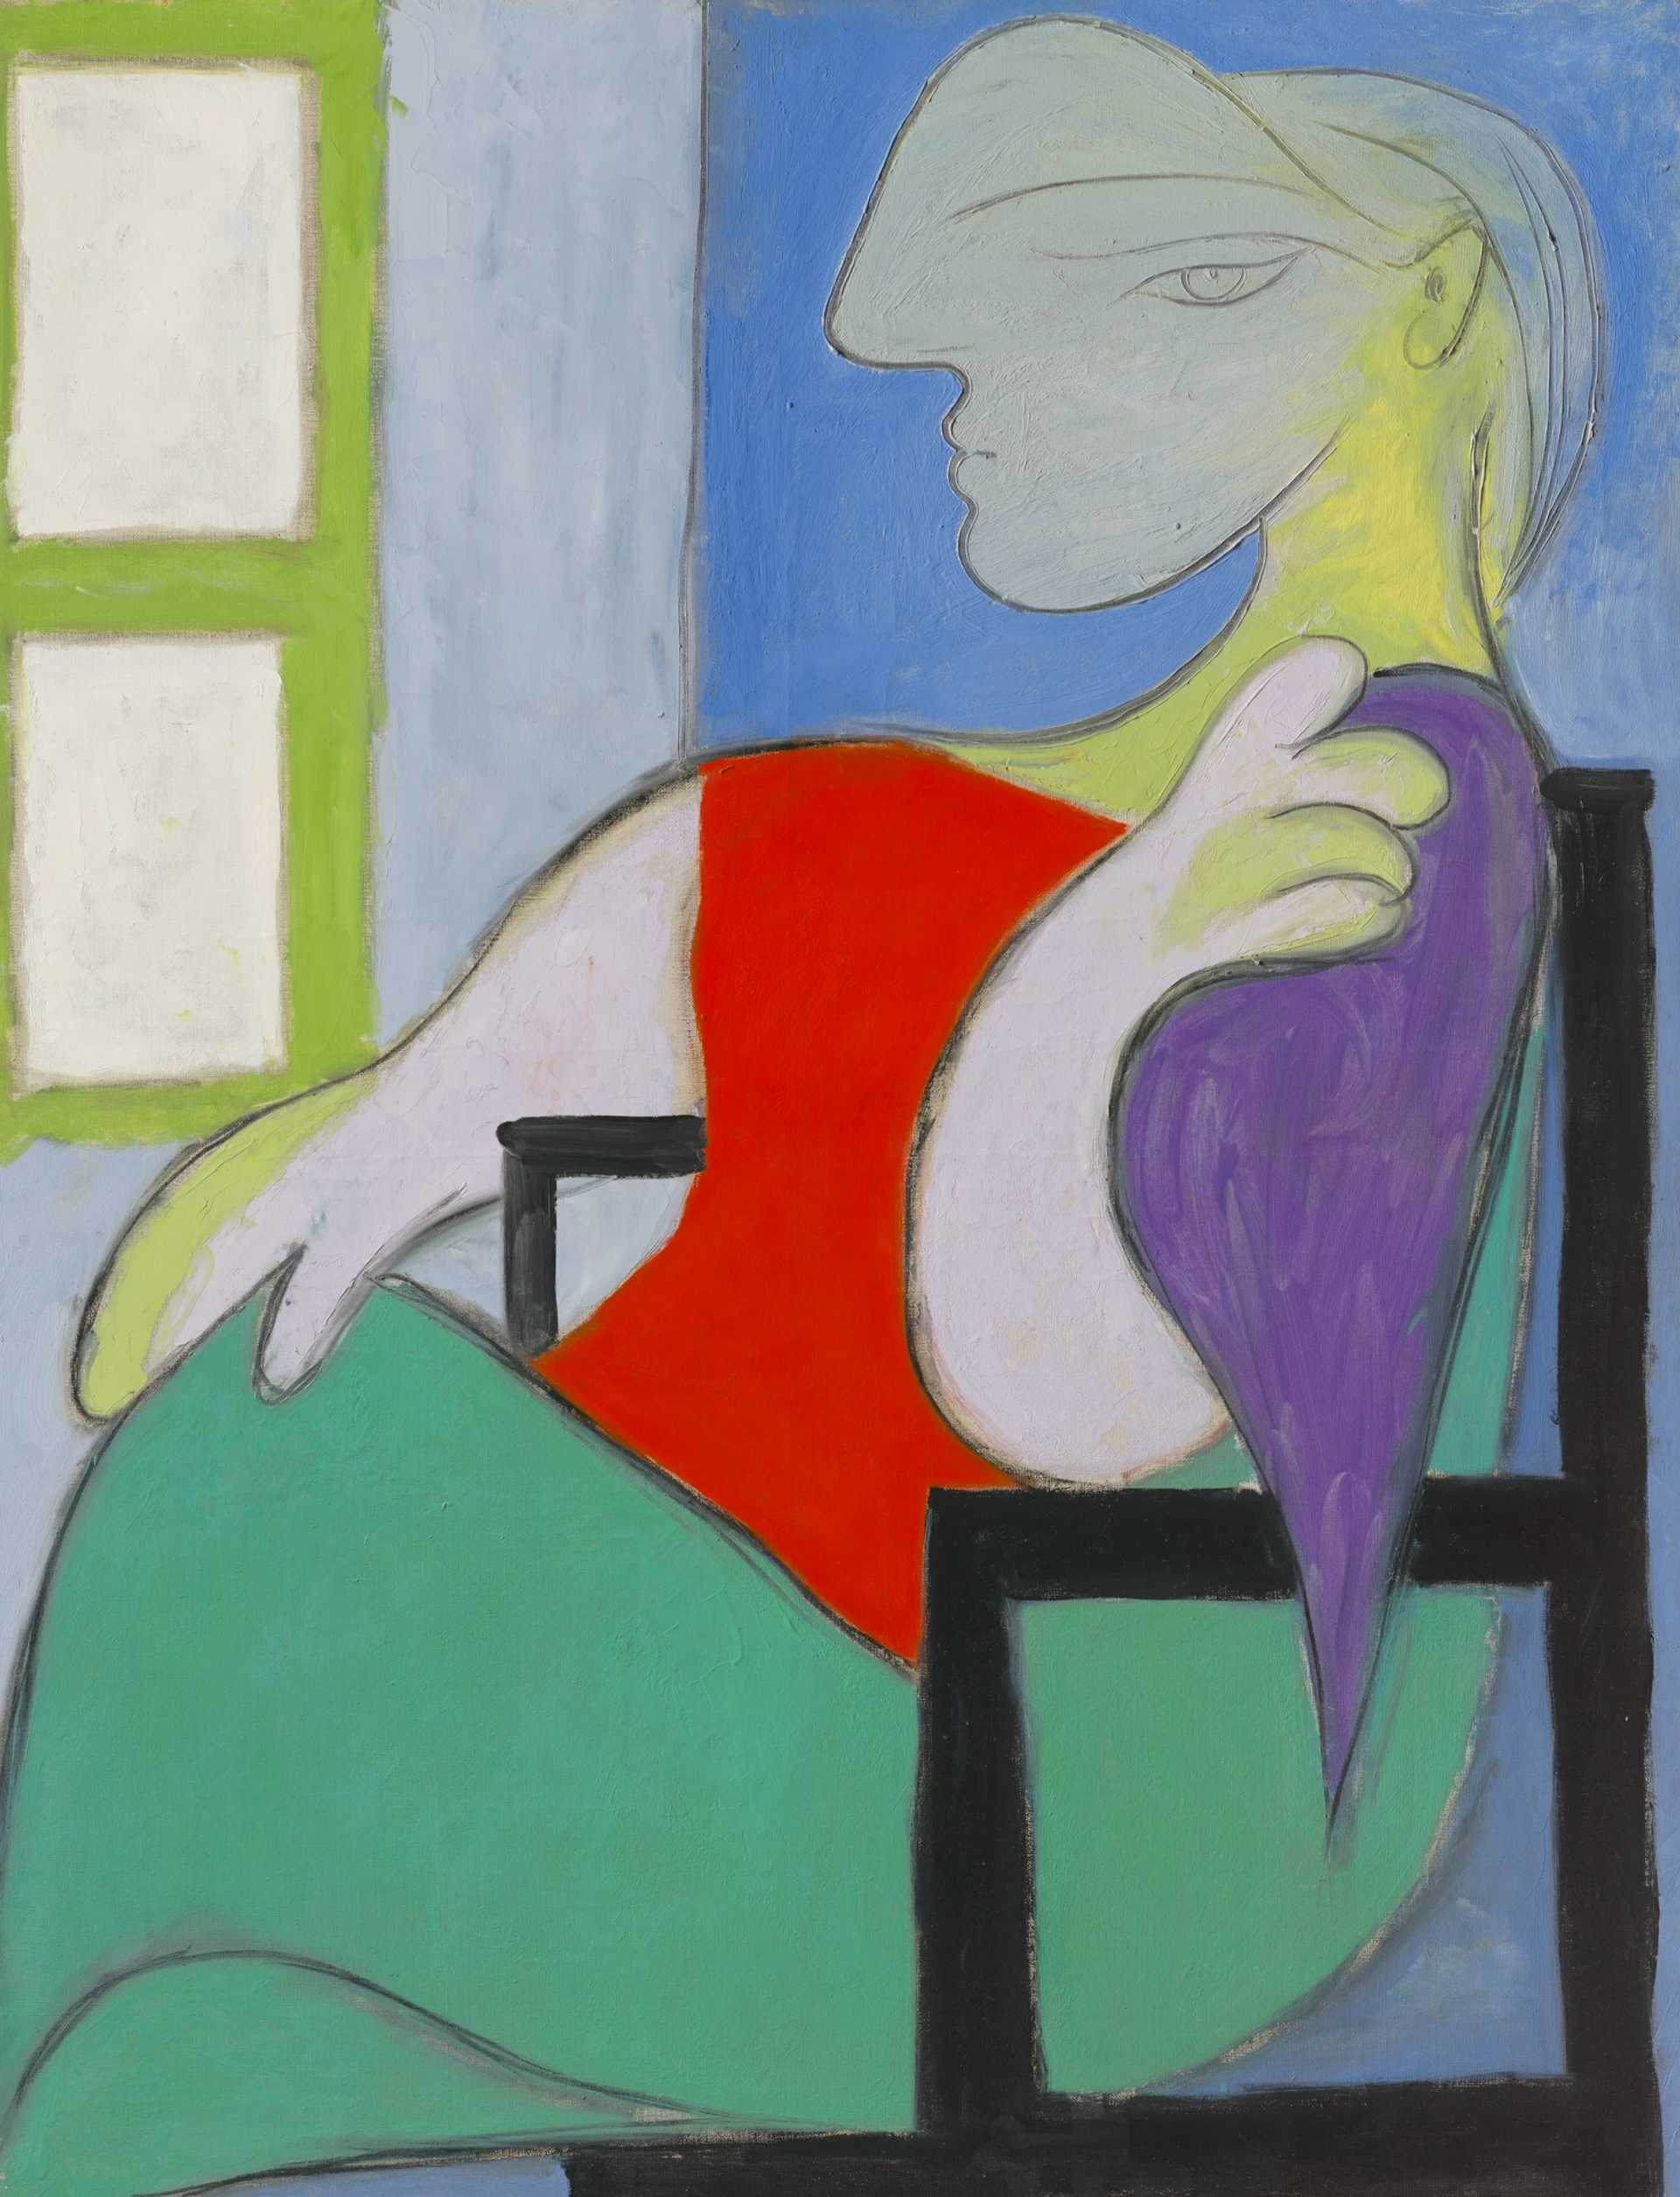 Painting by Pablo Picasso depicting a seated woman. The figure is deconstructed into simple curvaceous forms. She is wearing red and green clothing, and is sat on a black chair, by a window, against a blue and grey background.